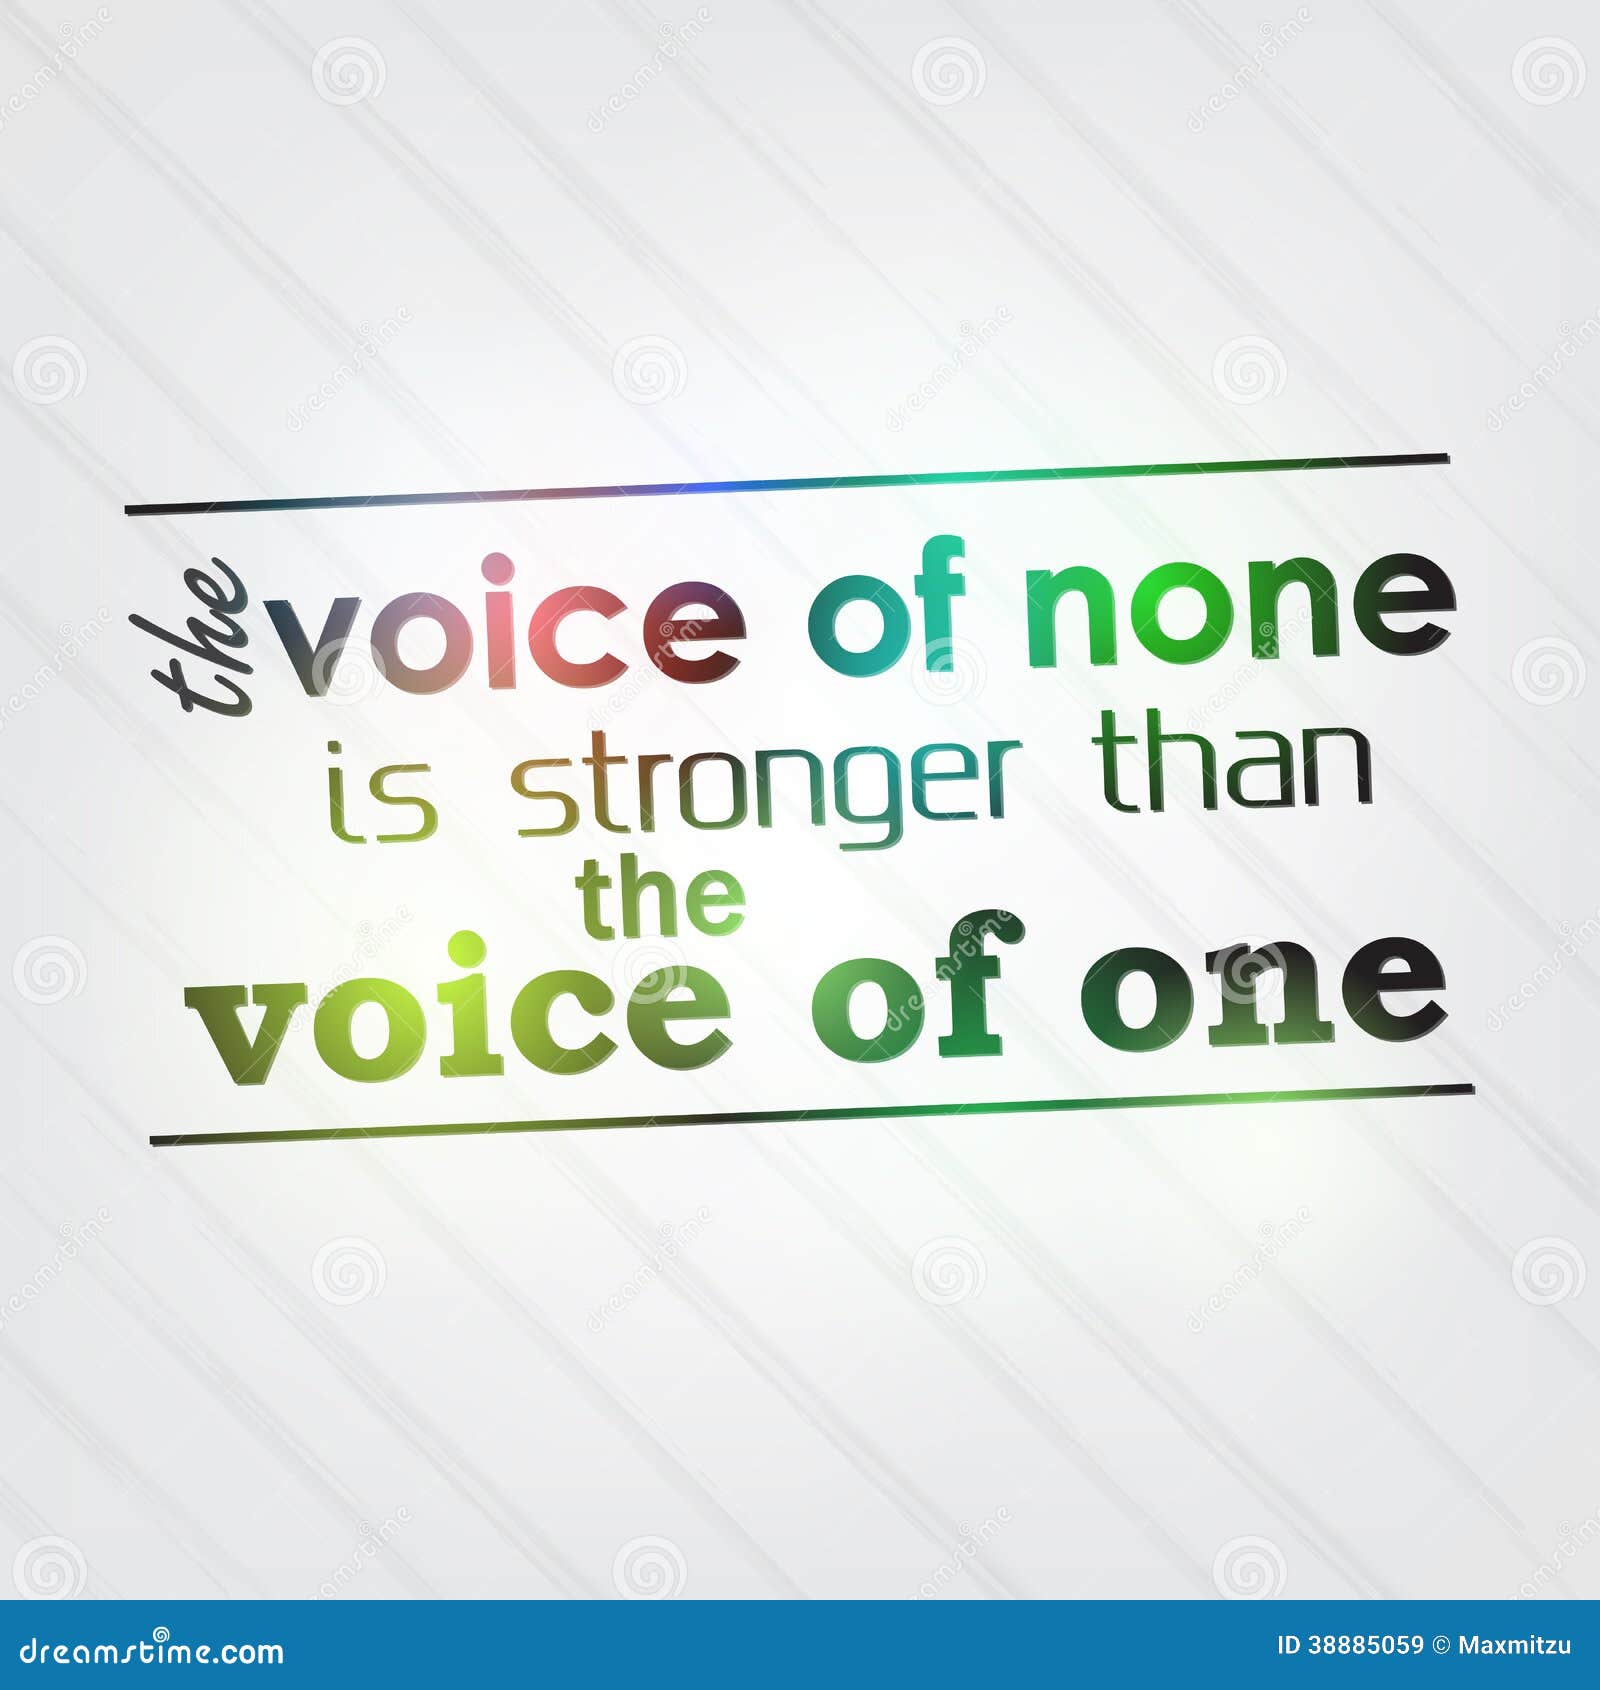 voice of none is stronger than the voice of one